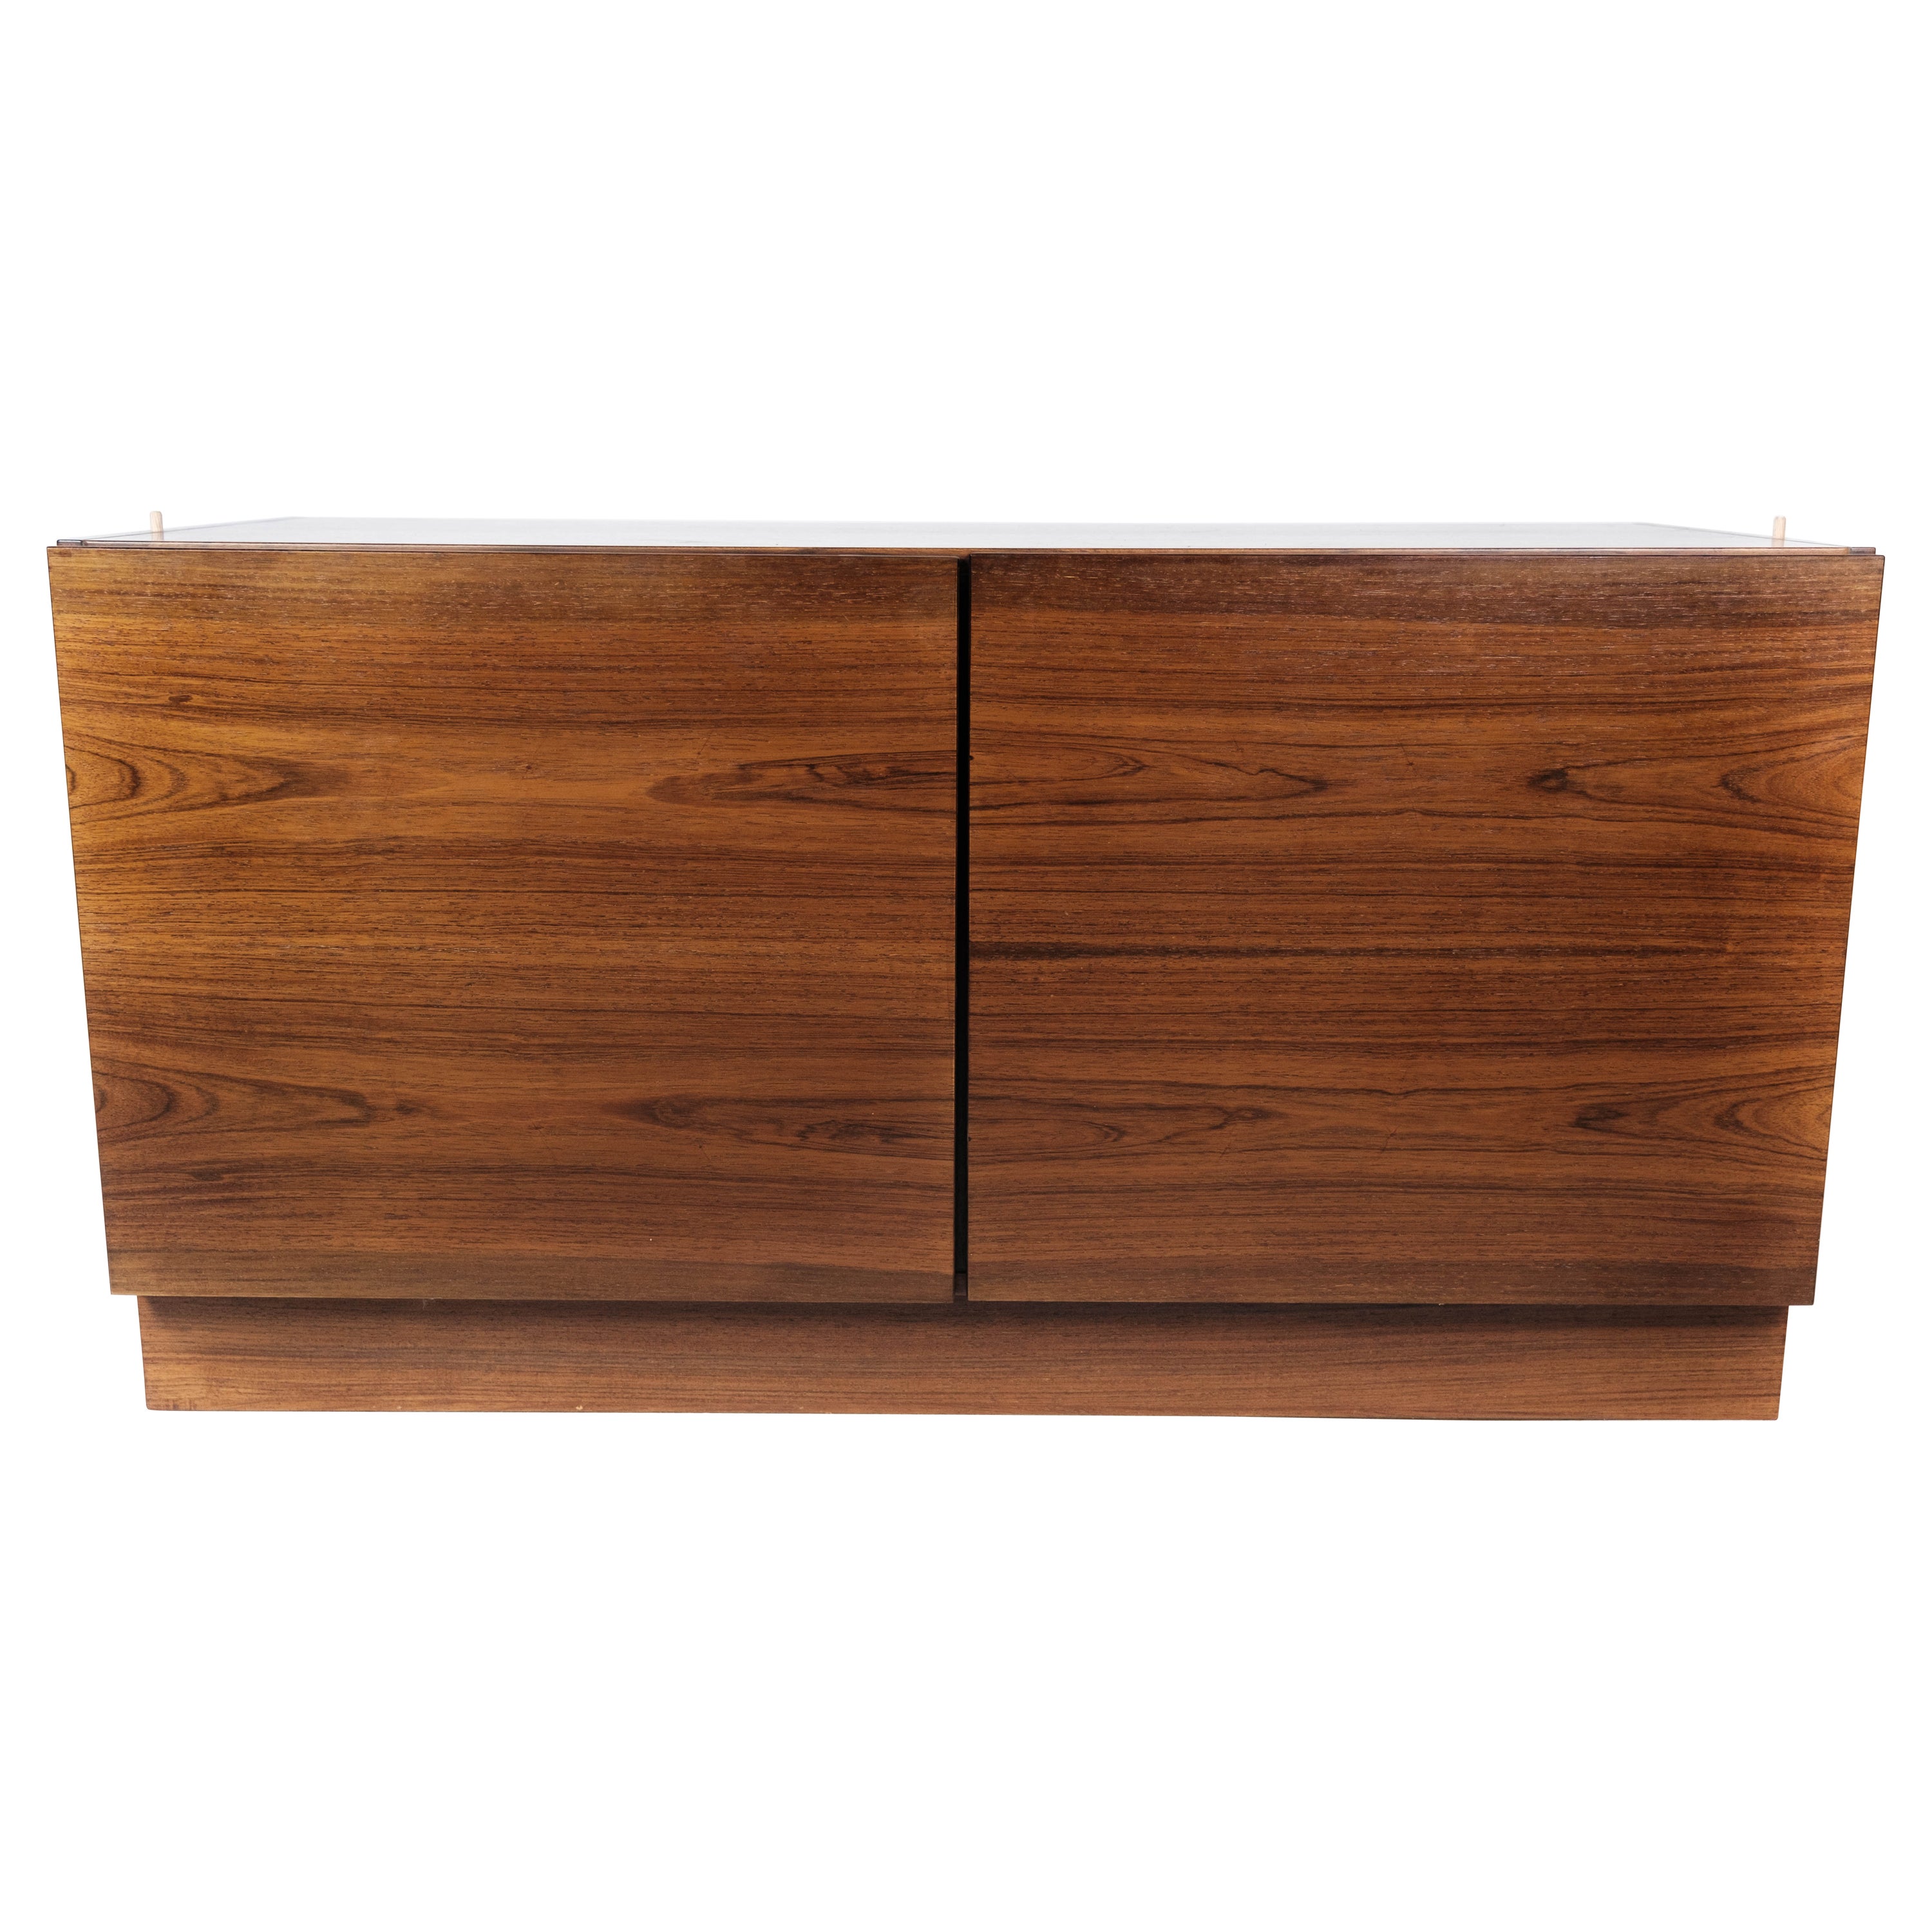 Low Chest of Drawers in Rosewood of Danish Design from the 1960s